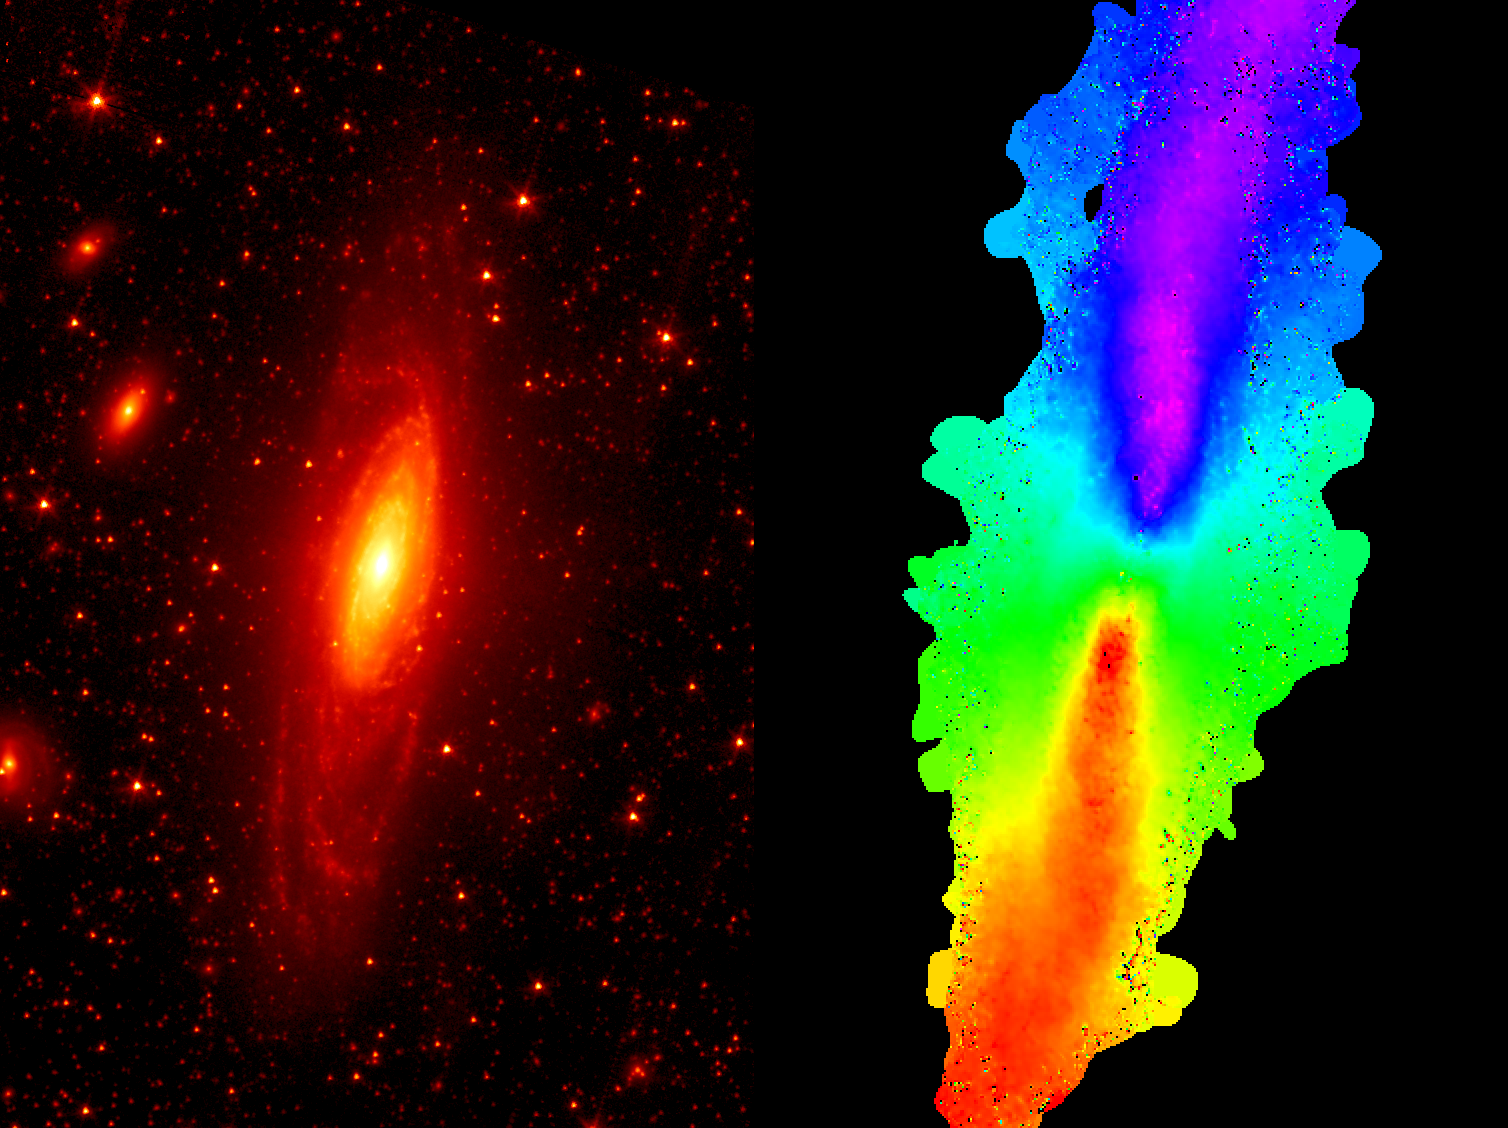 NGC 7331 as seen in near infrared emission from starlight alongside an image of the Doppler shifting of the 21 cm radio line emission from hydrogen gas